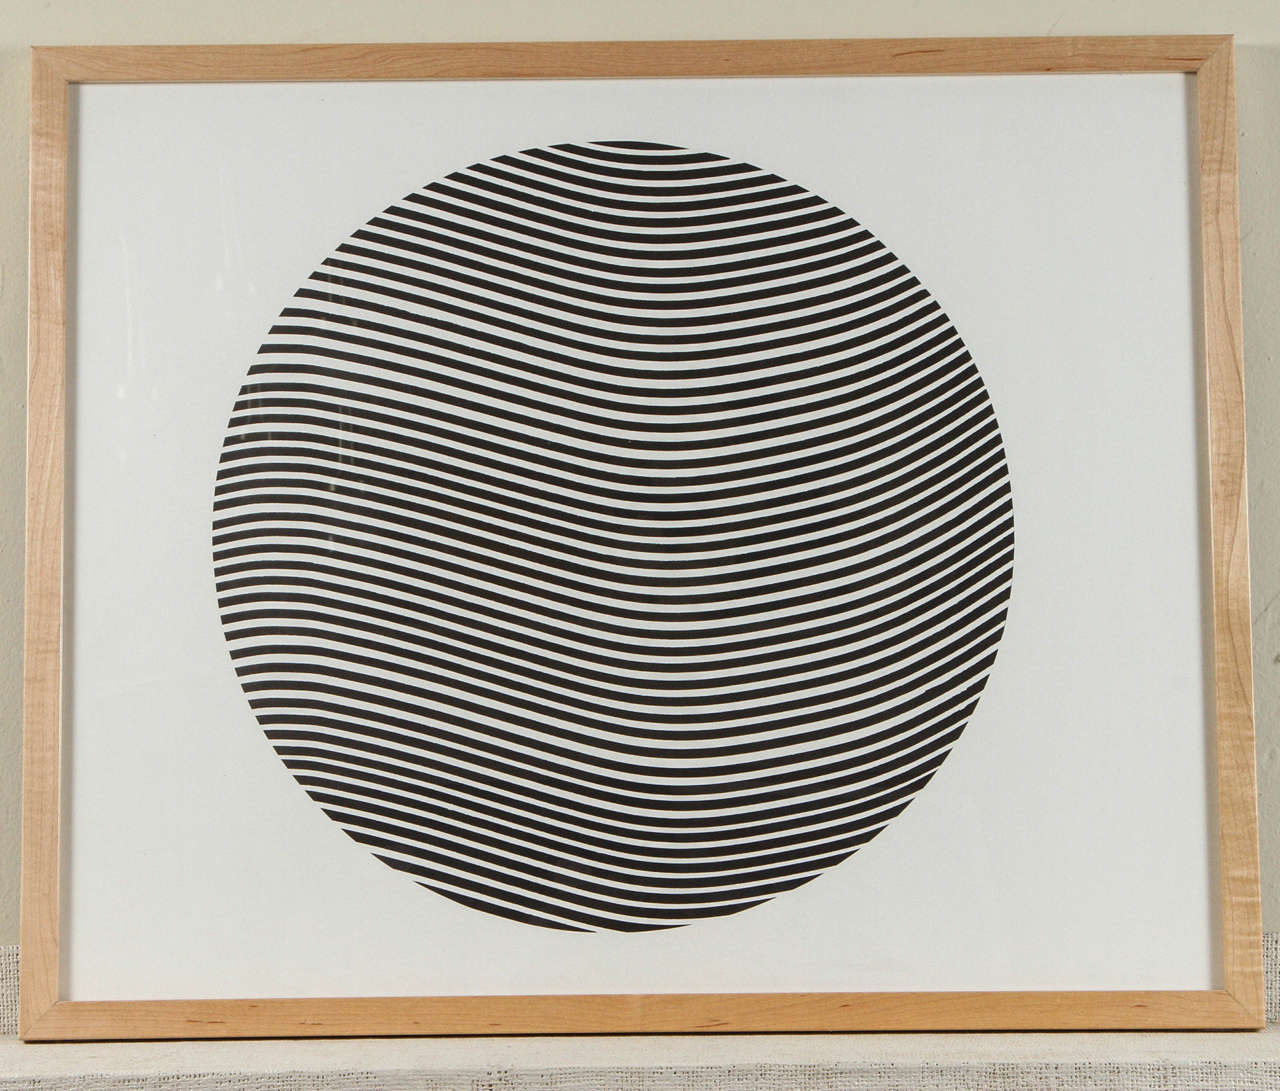 Black and white op art print from the 1970s. Not signed by attributed to Marc Schreibman. Maple frame.